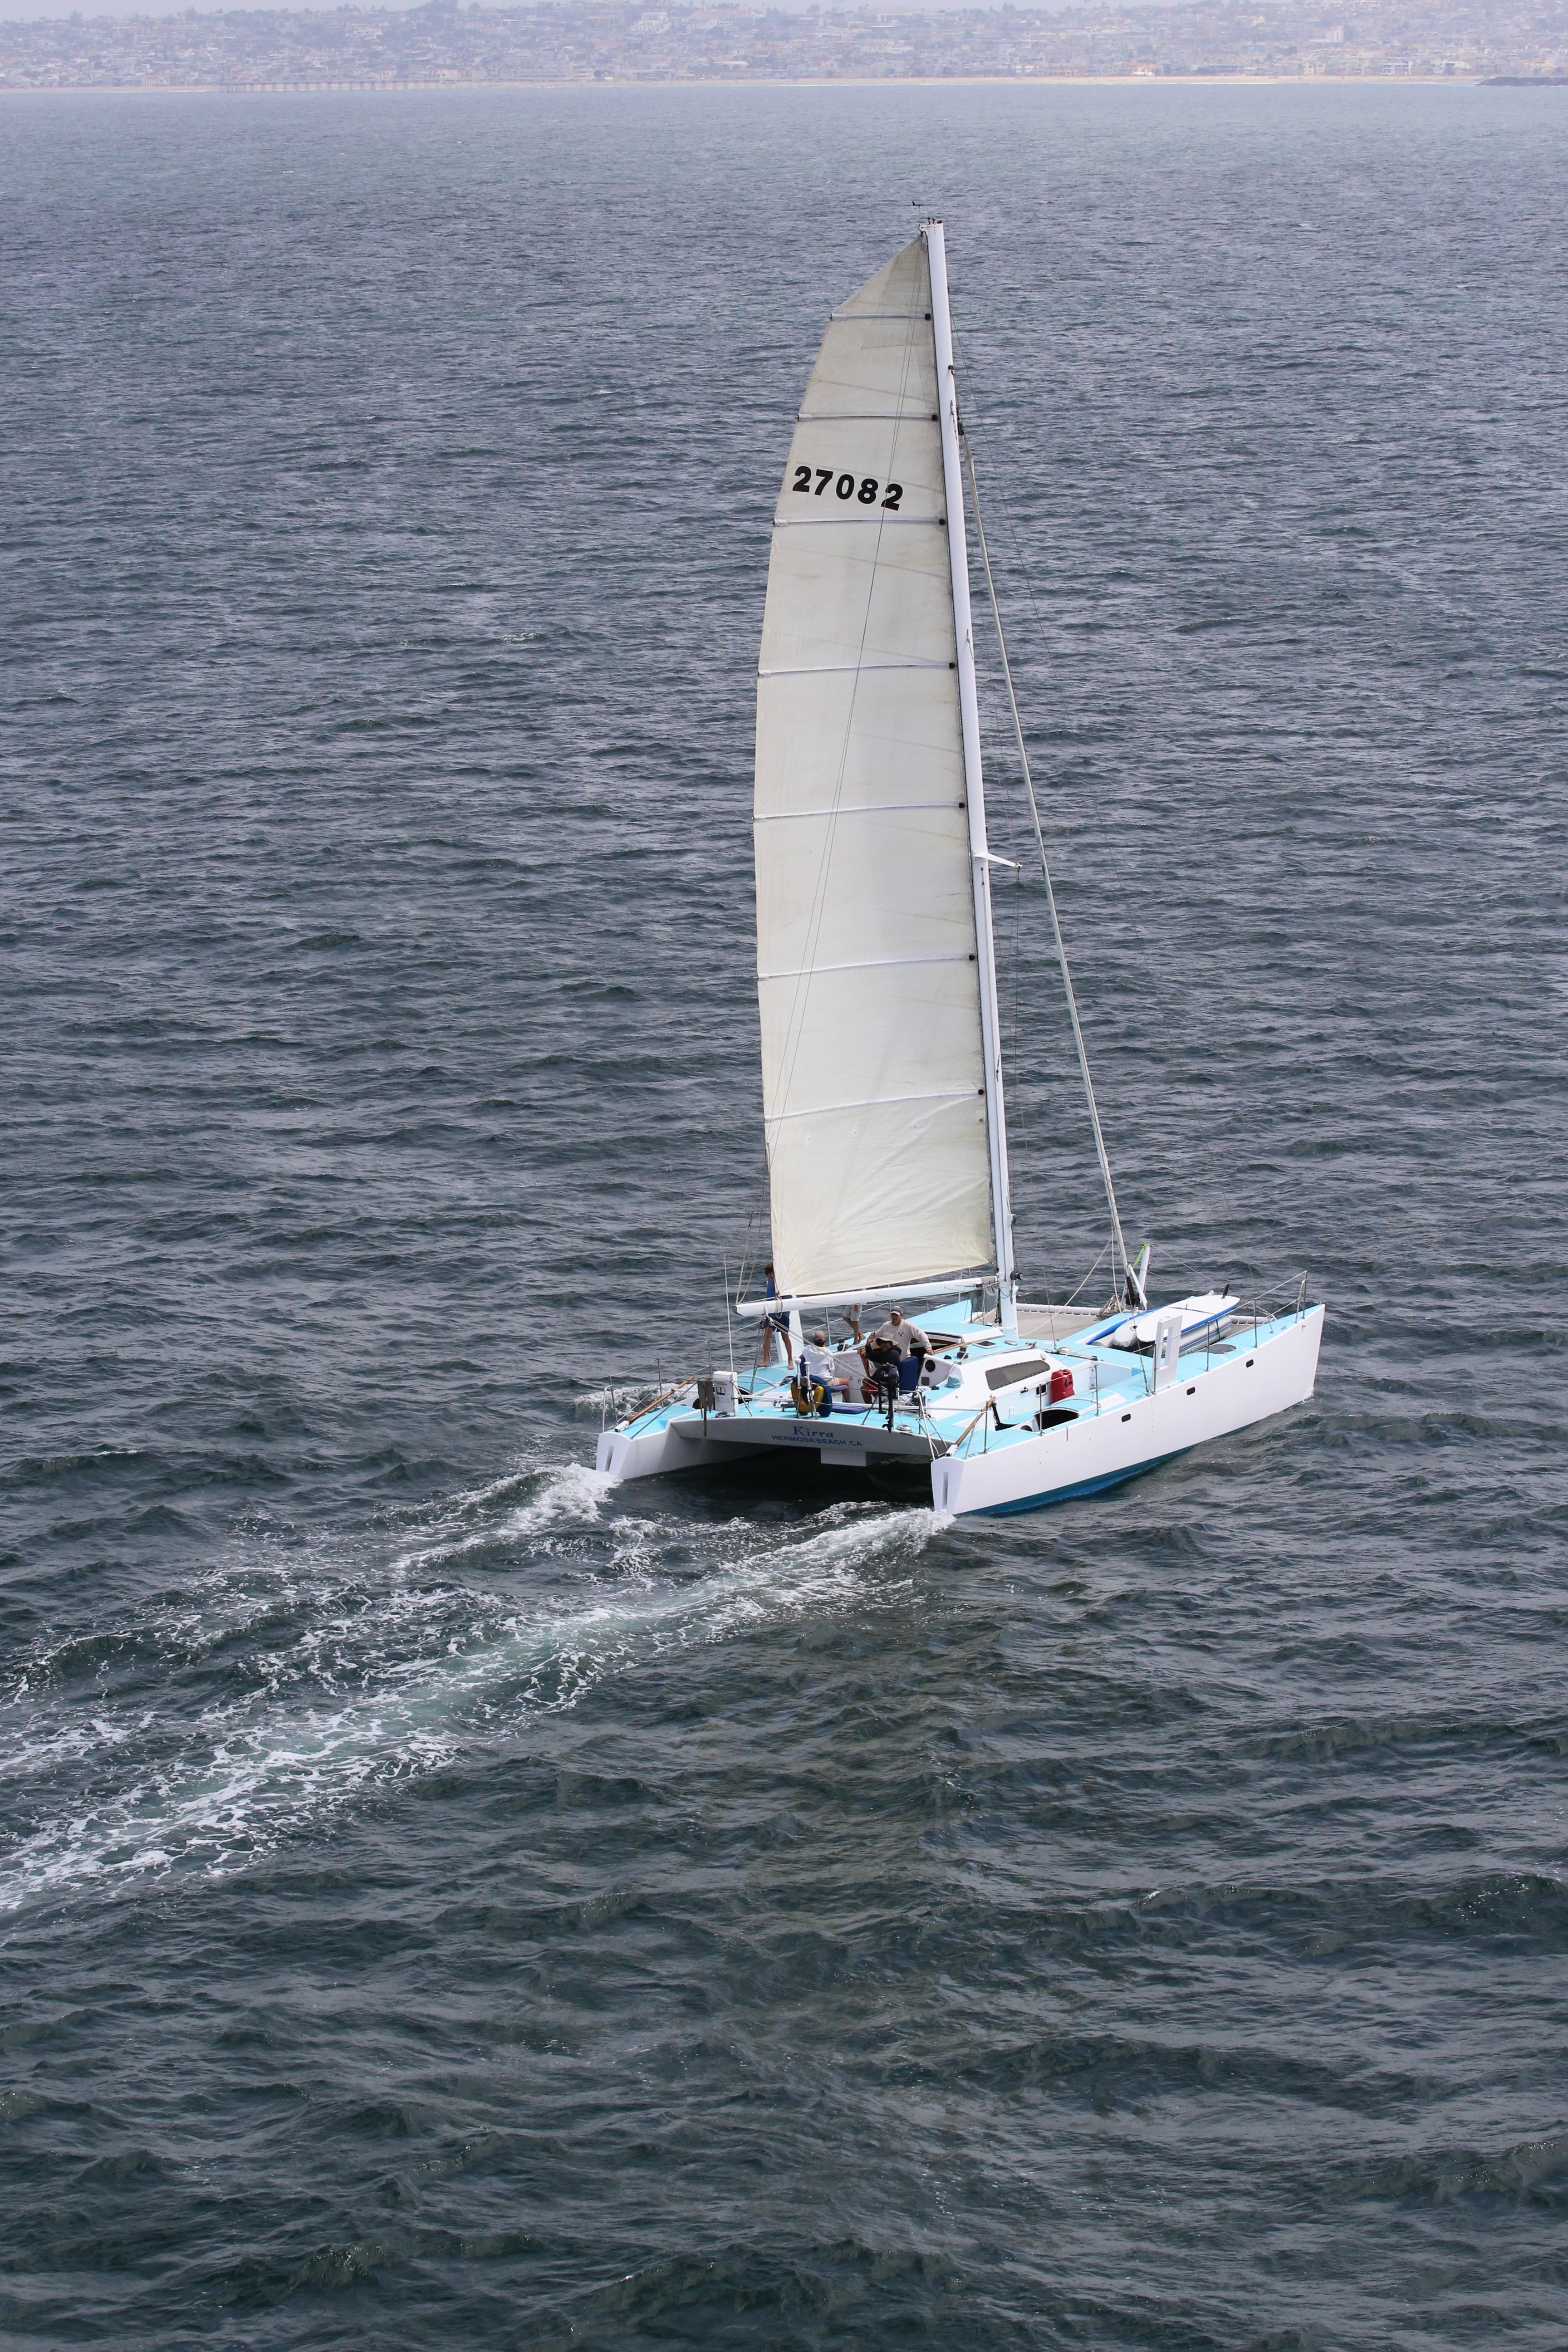 A Dozen Catamarans for Sale Priced from$100,000 to $150,000